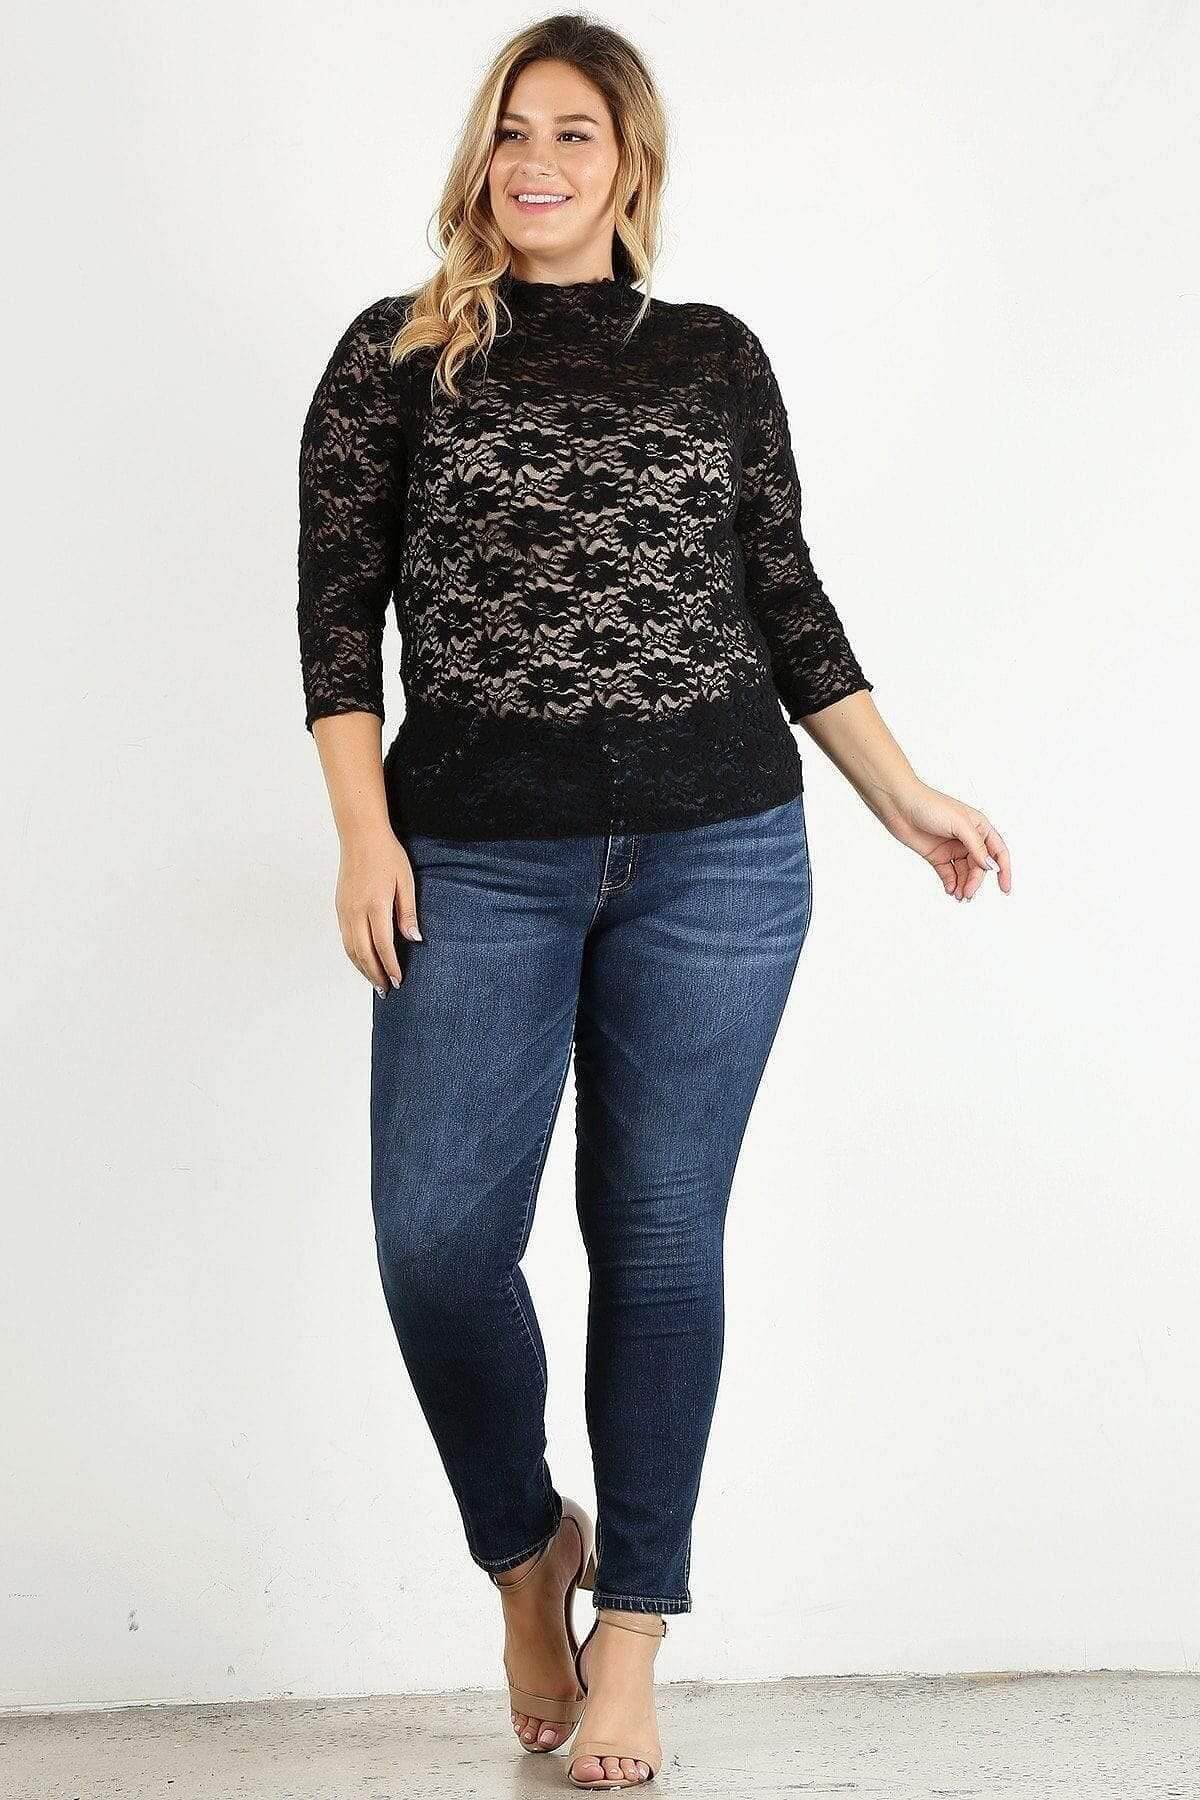 Black Plus Size Midi Sleeve Lace Top - Shopping Therapy 1XL plus size tops